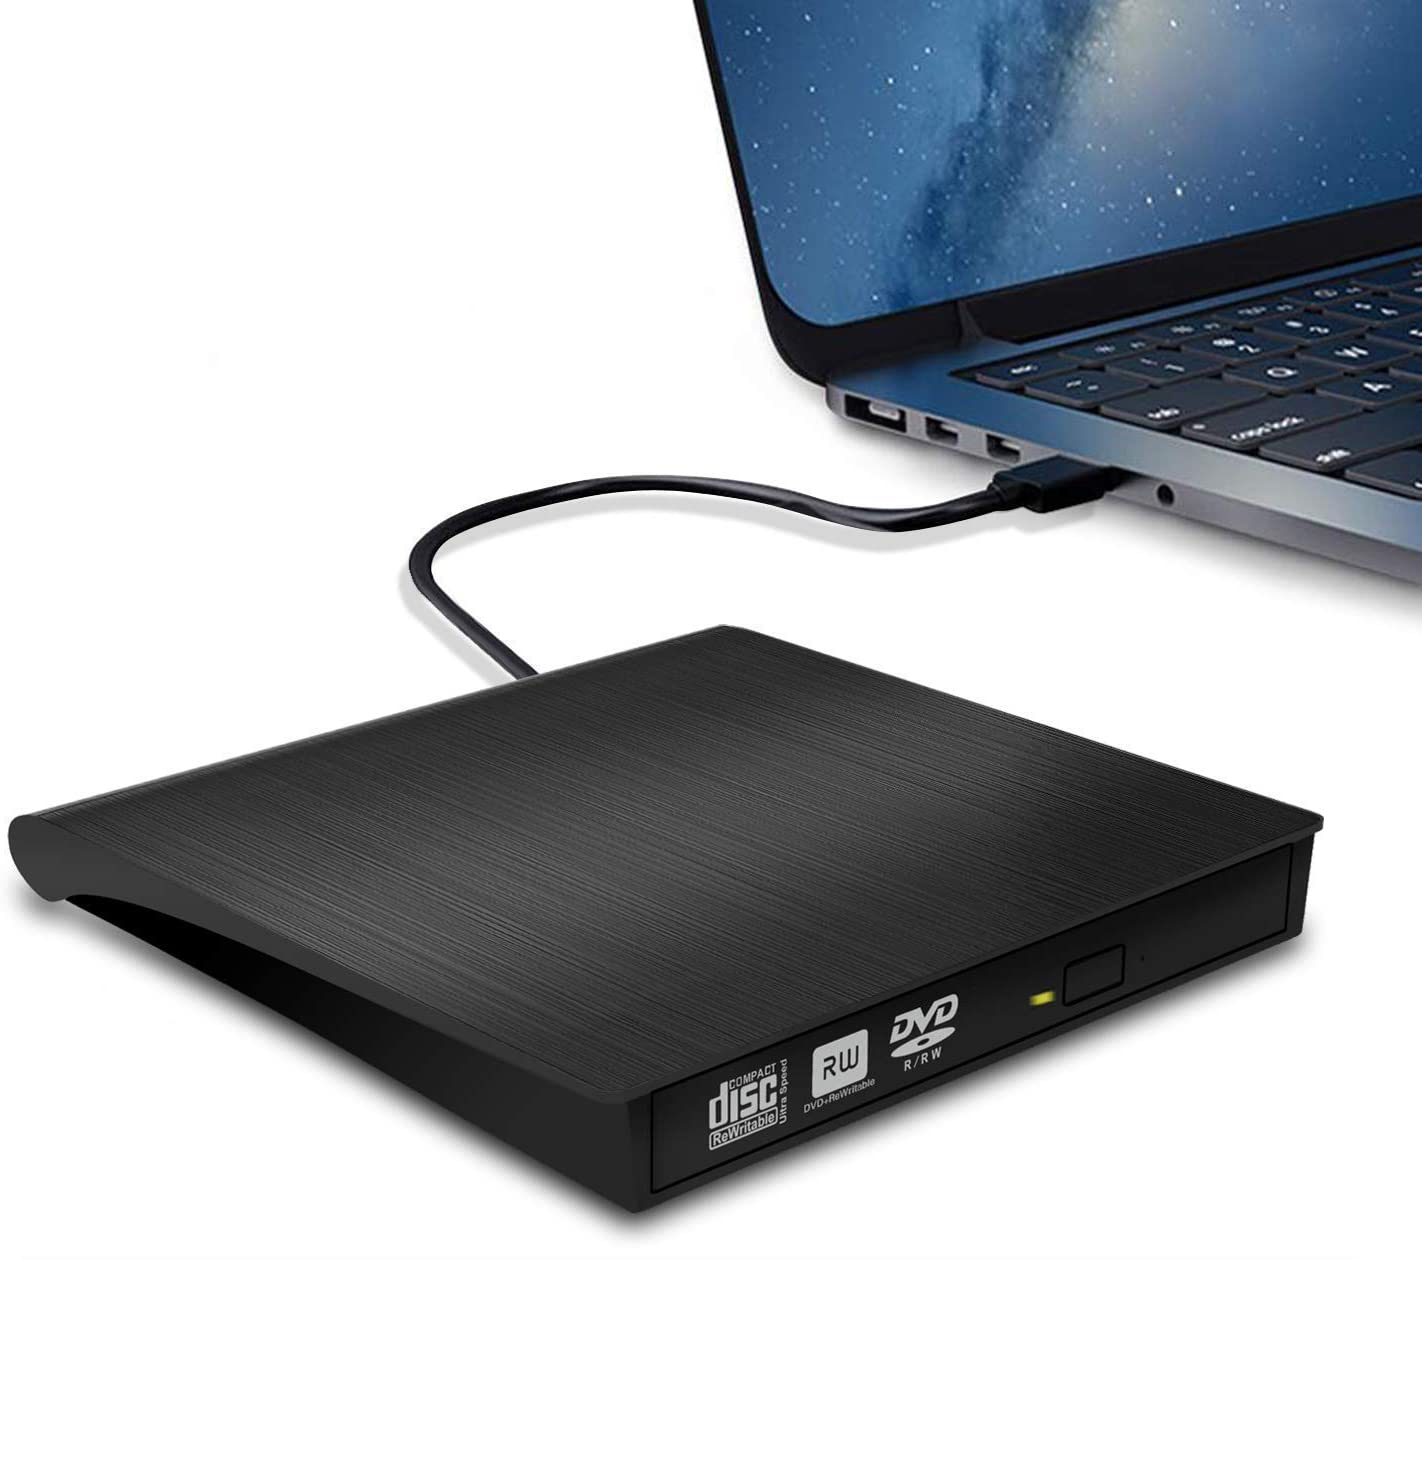 Find USB3.0 External Optical Drive Slim USB CD DVD Burner DVD-RW Player Writer Support 2MB Data Transfer for PC Laptop Computer for Sale on Gipsybee.com with cryptocurrencies